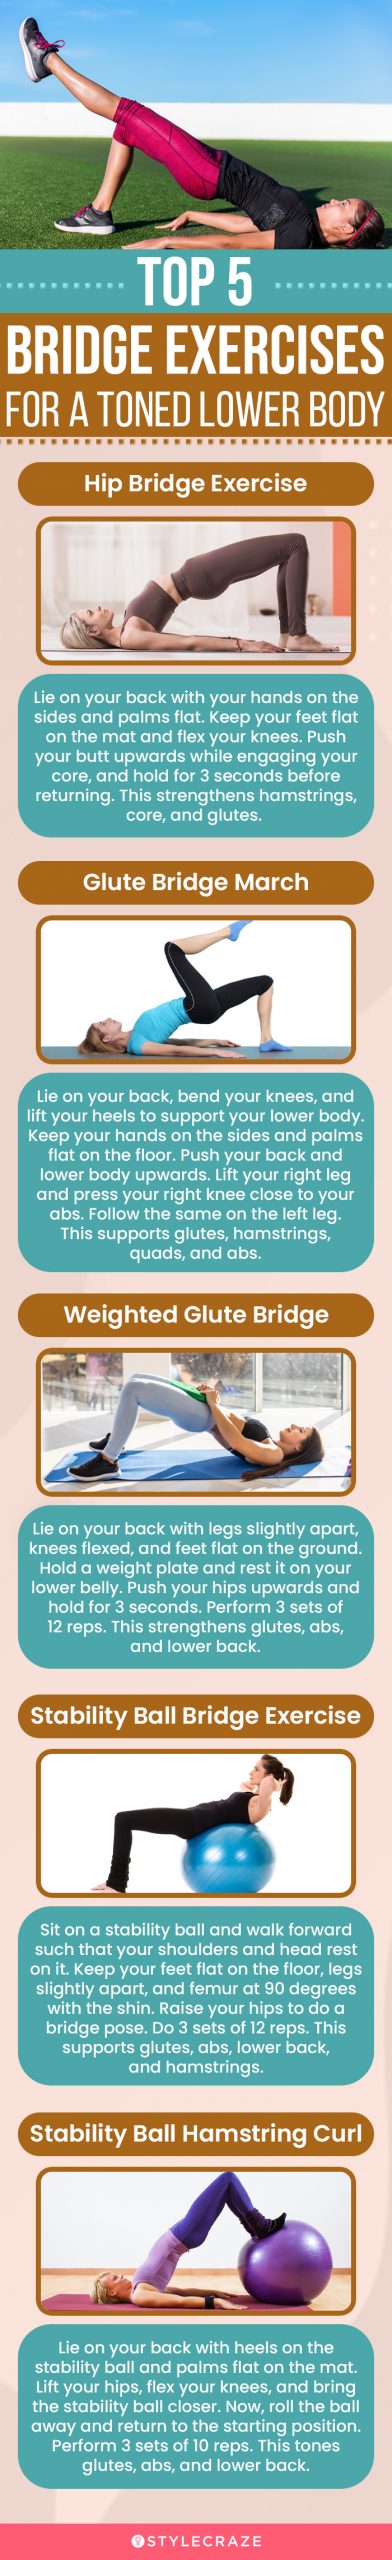 15 Effective Bridge Exercises And Their Benefits You Need To Know